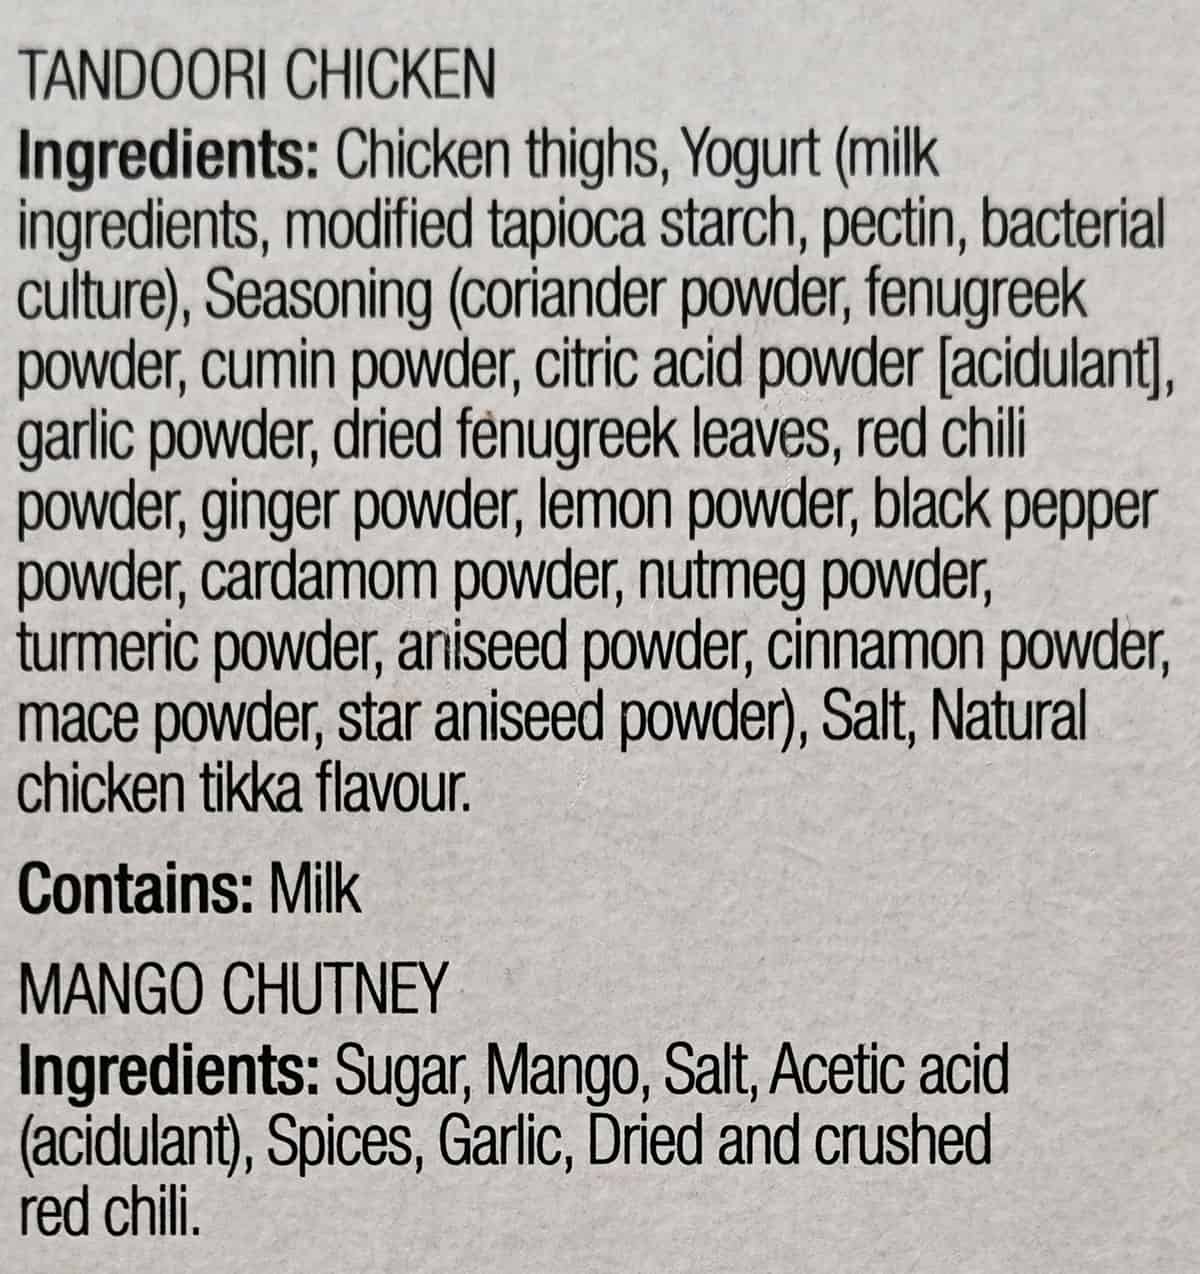 Costco Spice Mantra Tandoori Chicken ingredients from packaging. 